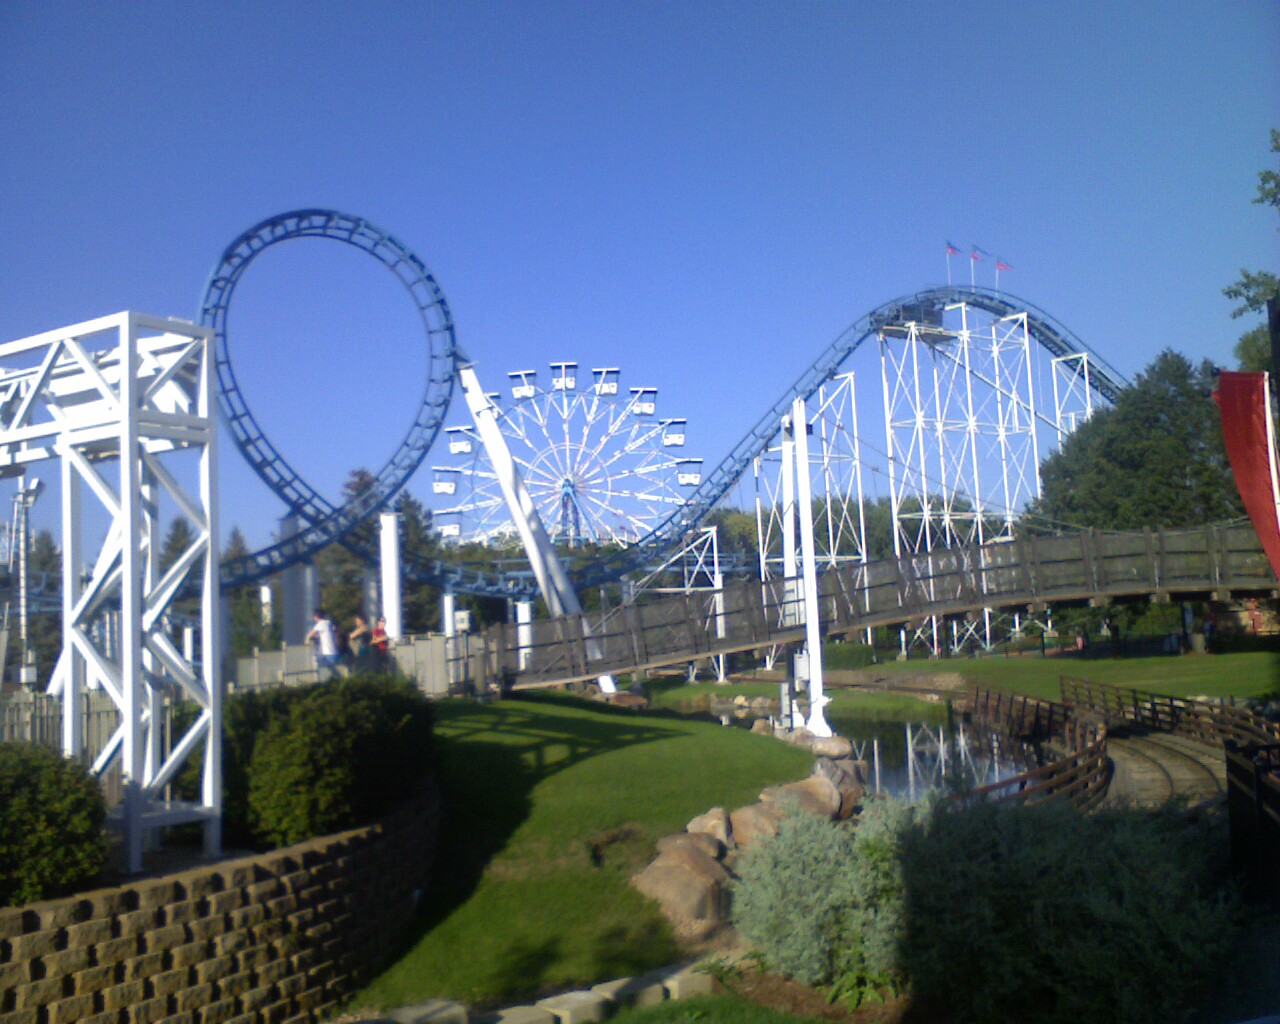 File:Excalibur and The Roller Coaster.jpg - Wikimedia Commons